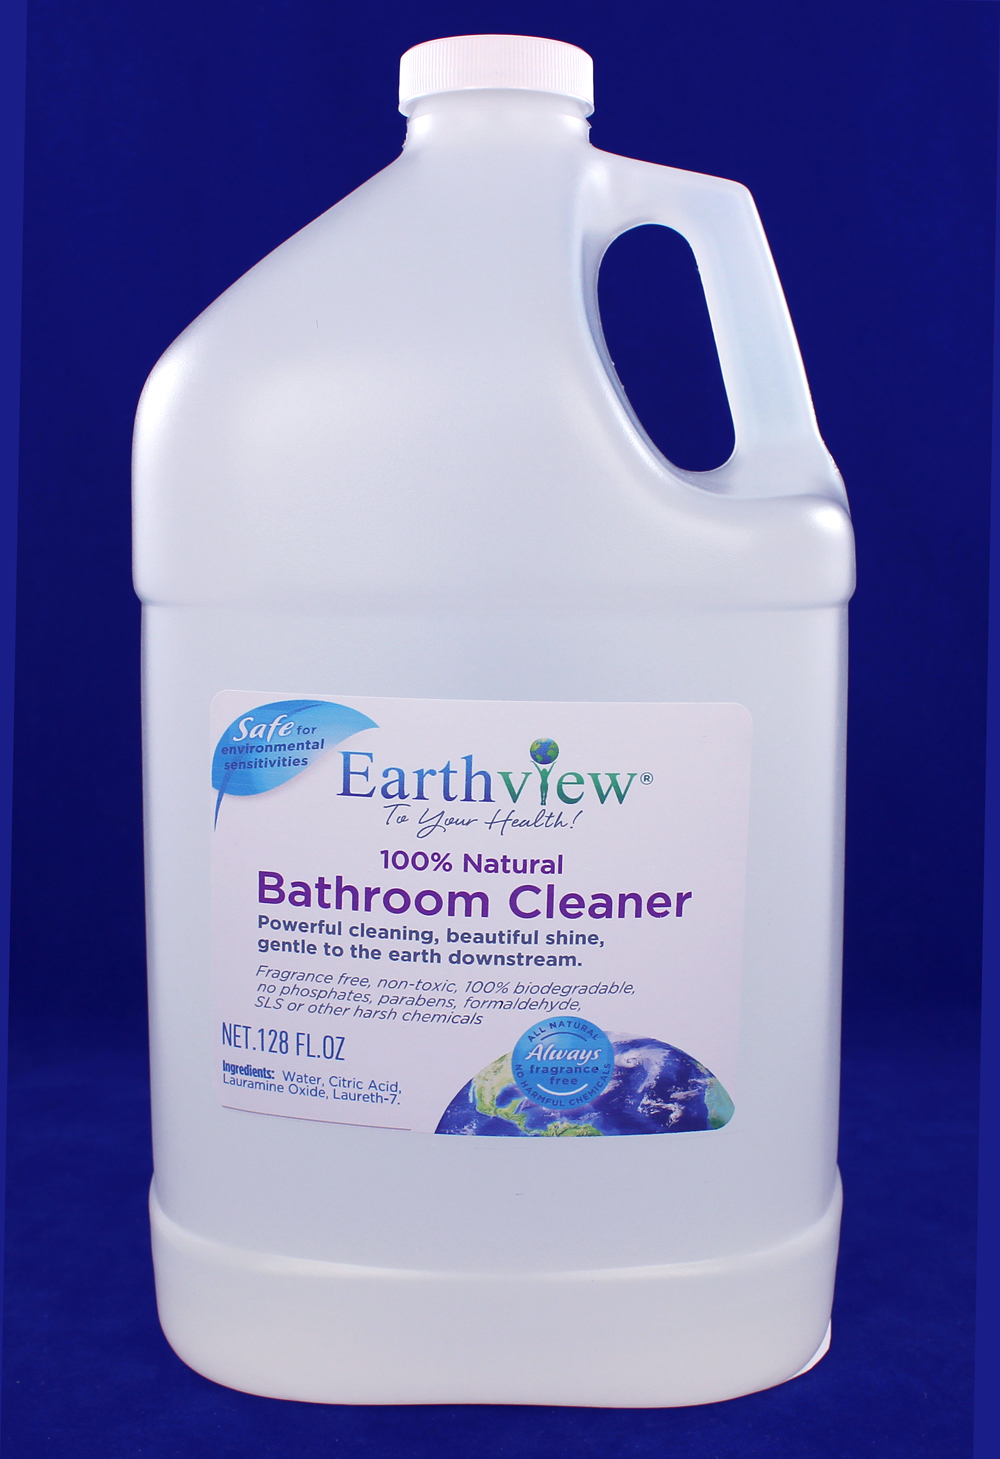 https://www.earthviewproducts.com/wp-content/uploads/2016/04/Bathroom-Cleaner-Gallon-FRONT-1000px-rect-aspt.jpg